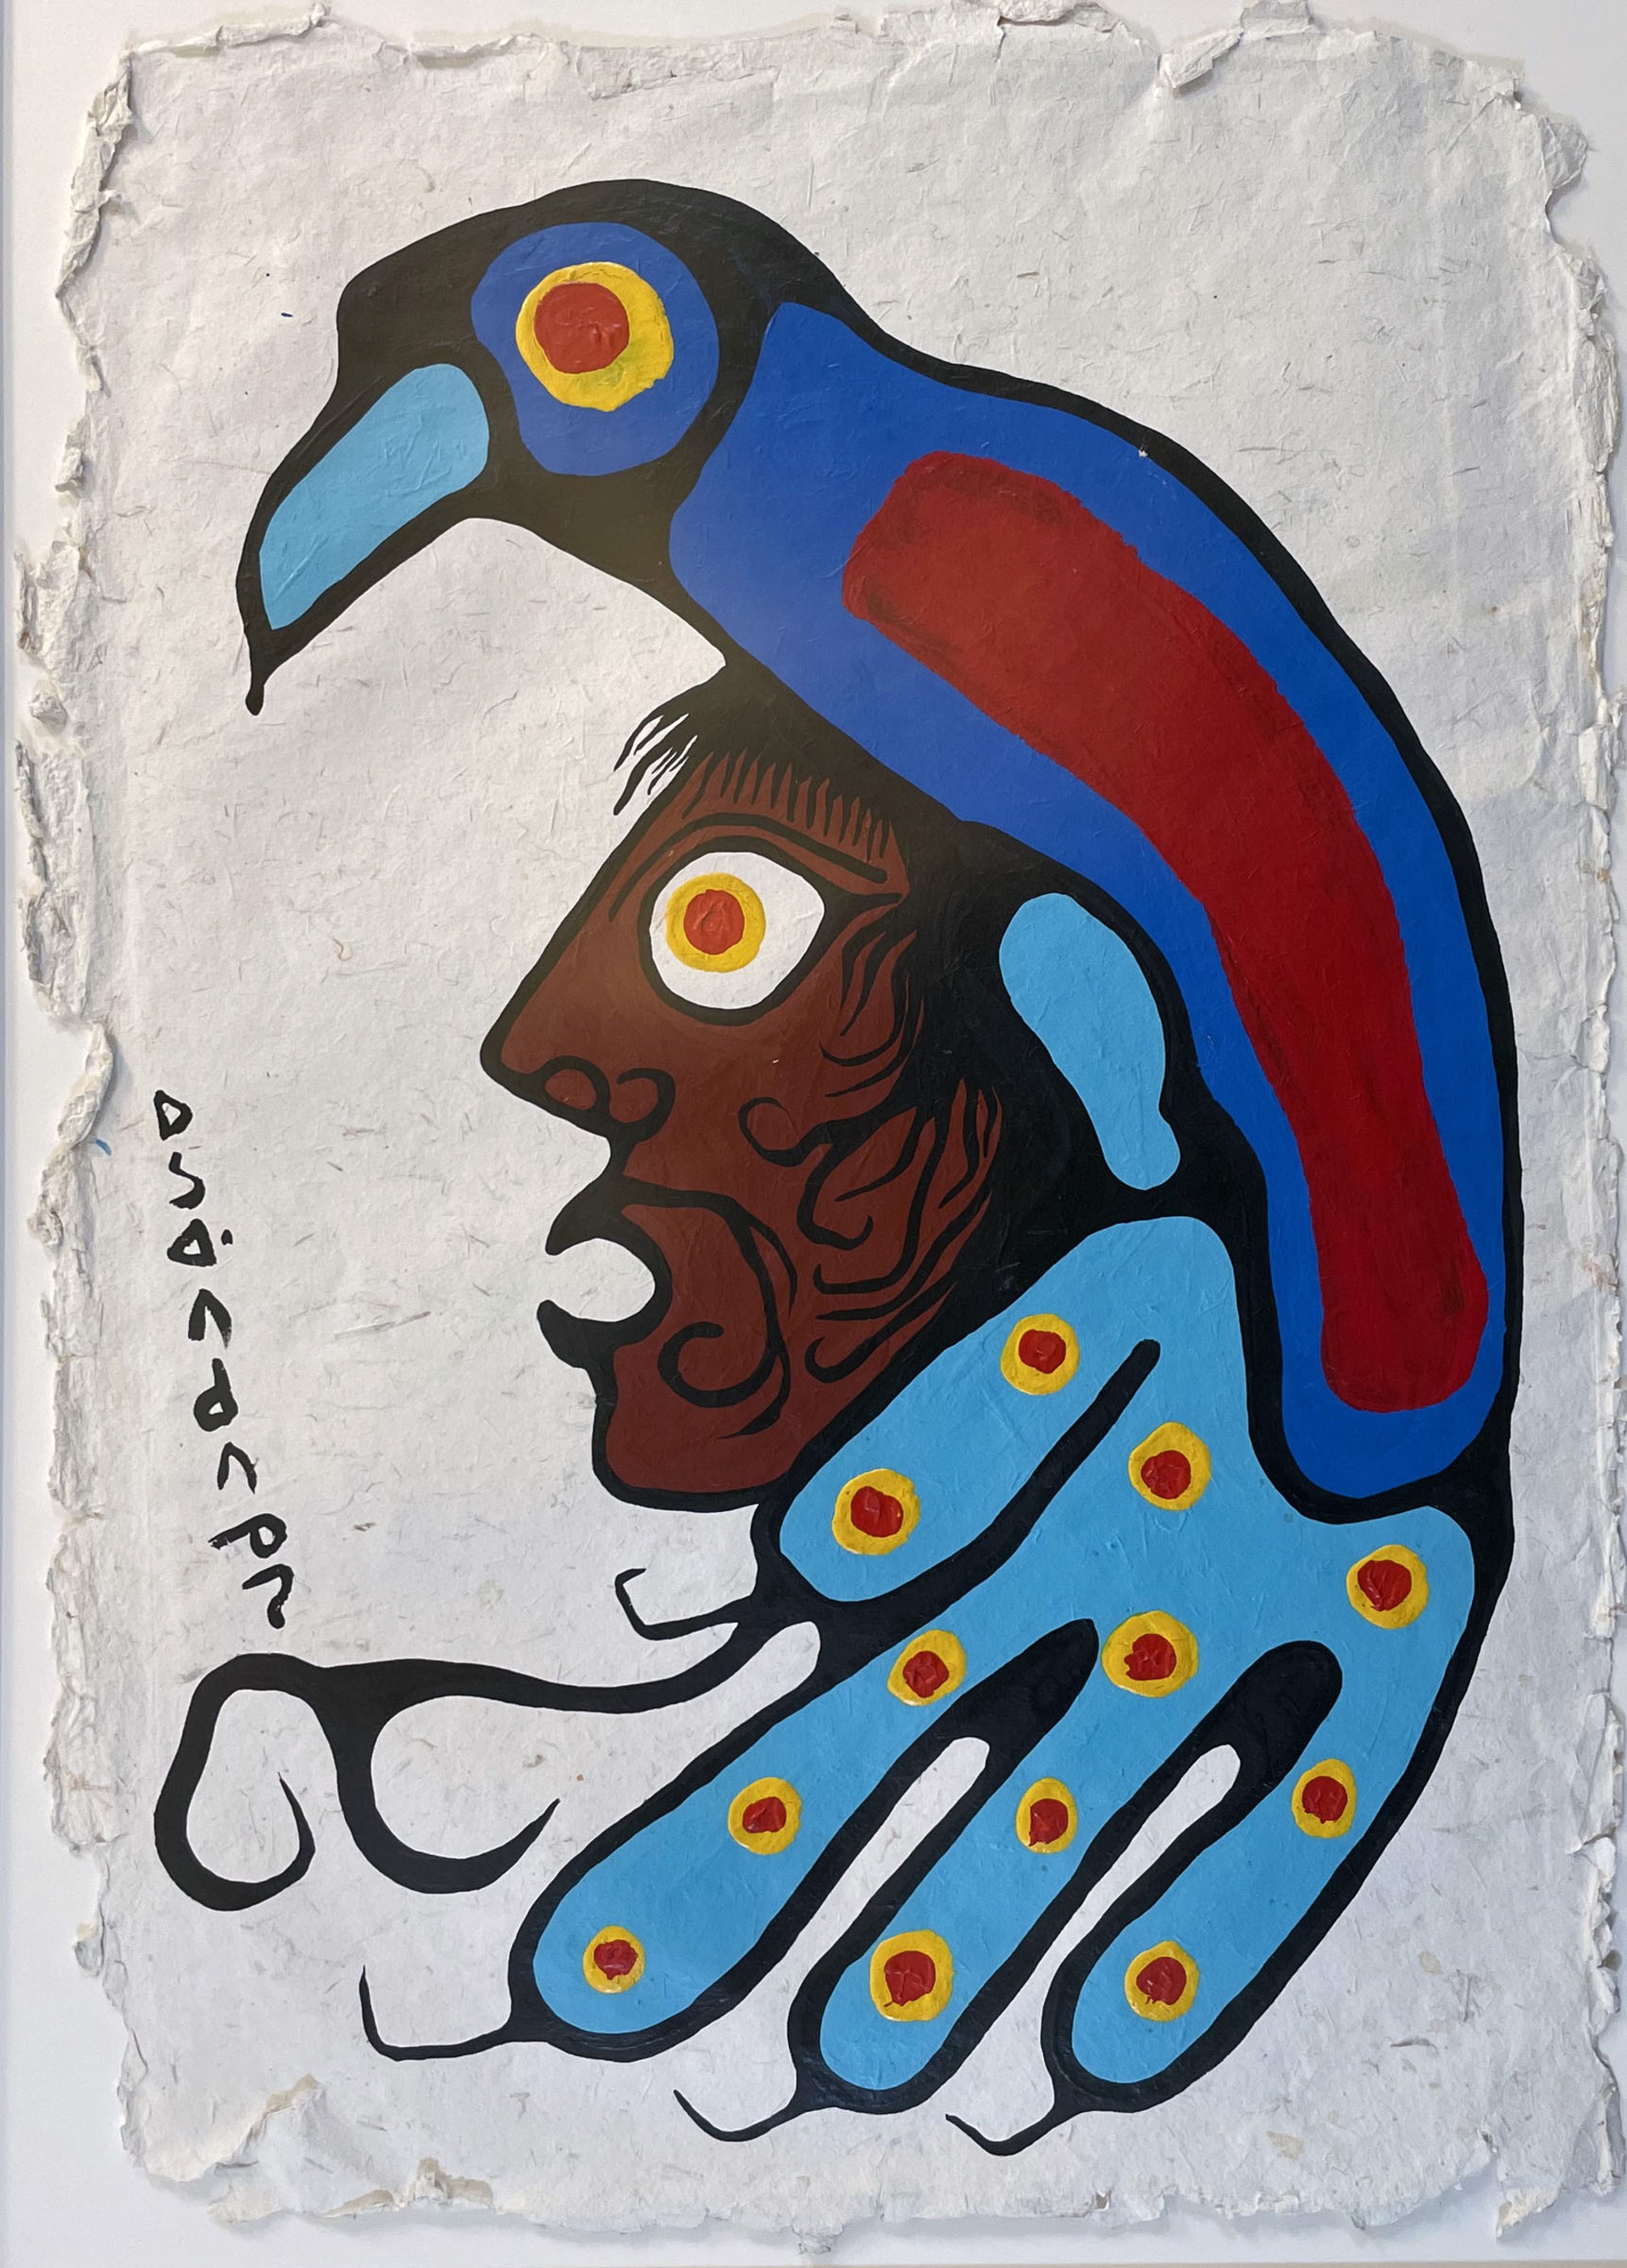 Untitled by Norval Morrisseau (1931-2007)